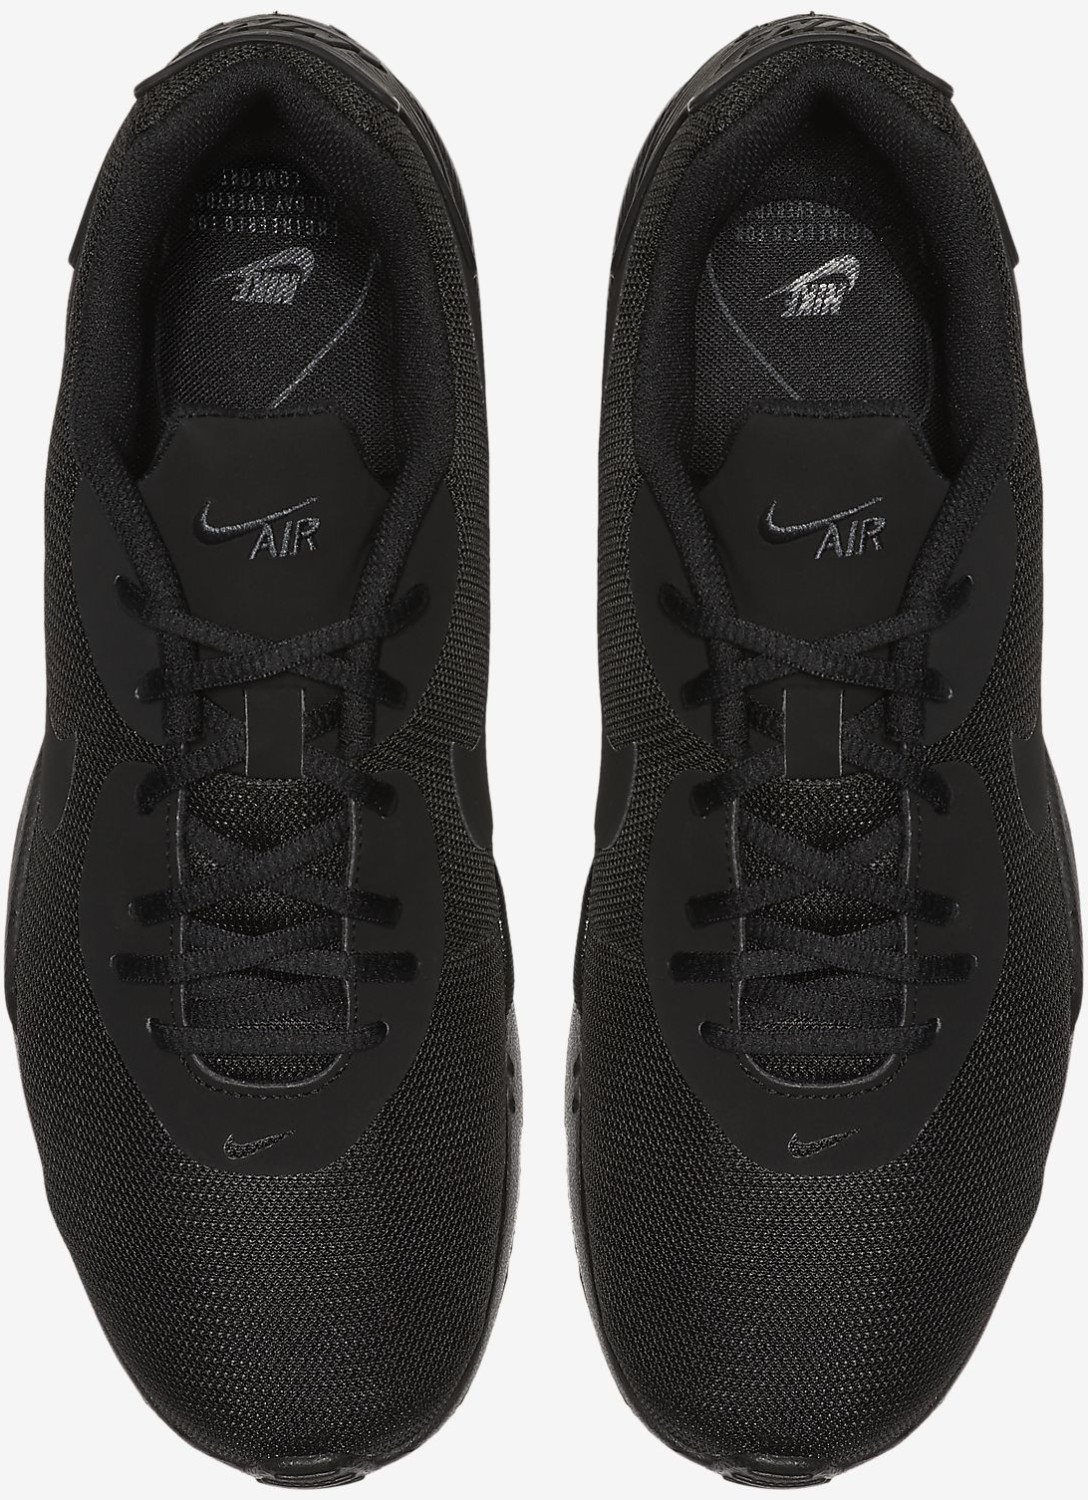 Buy Nike Air Max Oketo black/anthracite/black from £57.00 (Today ...